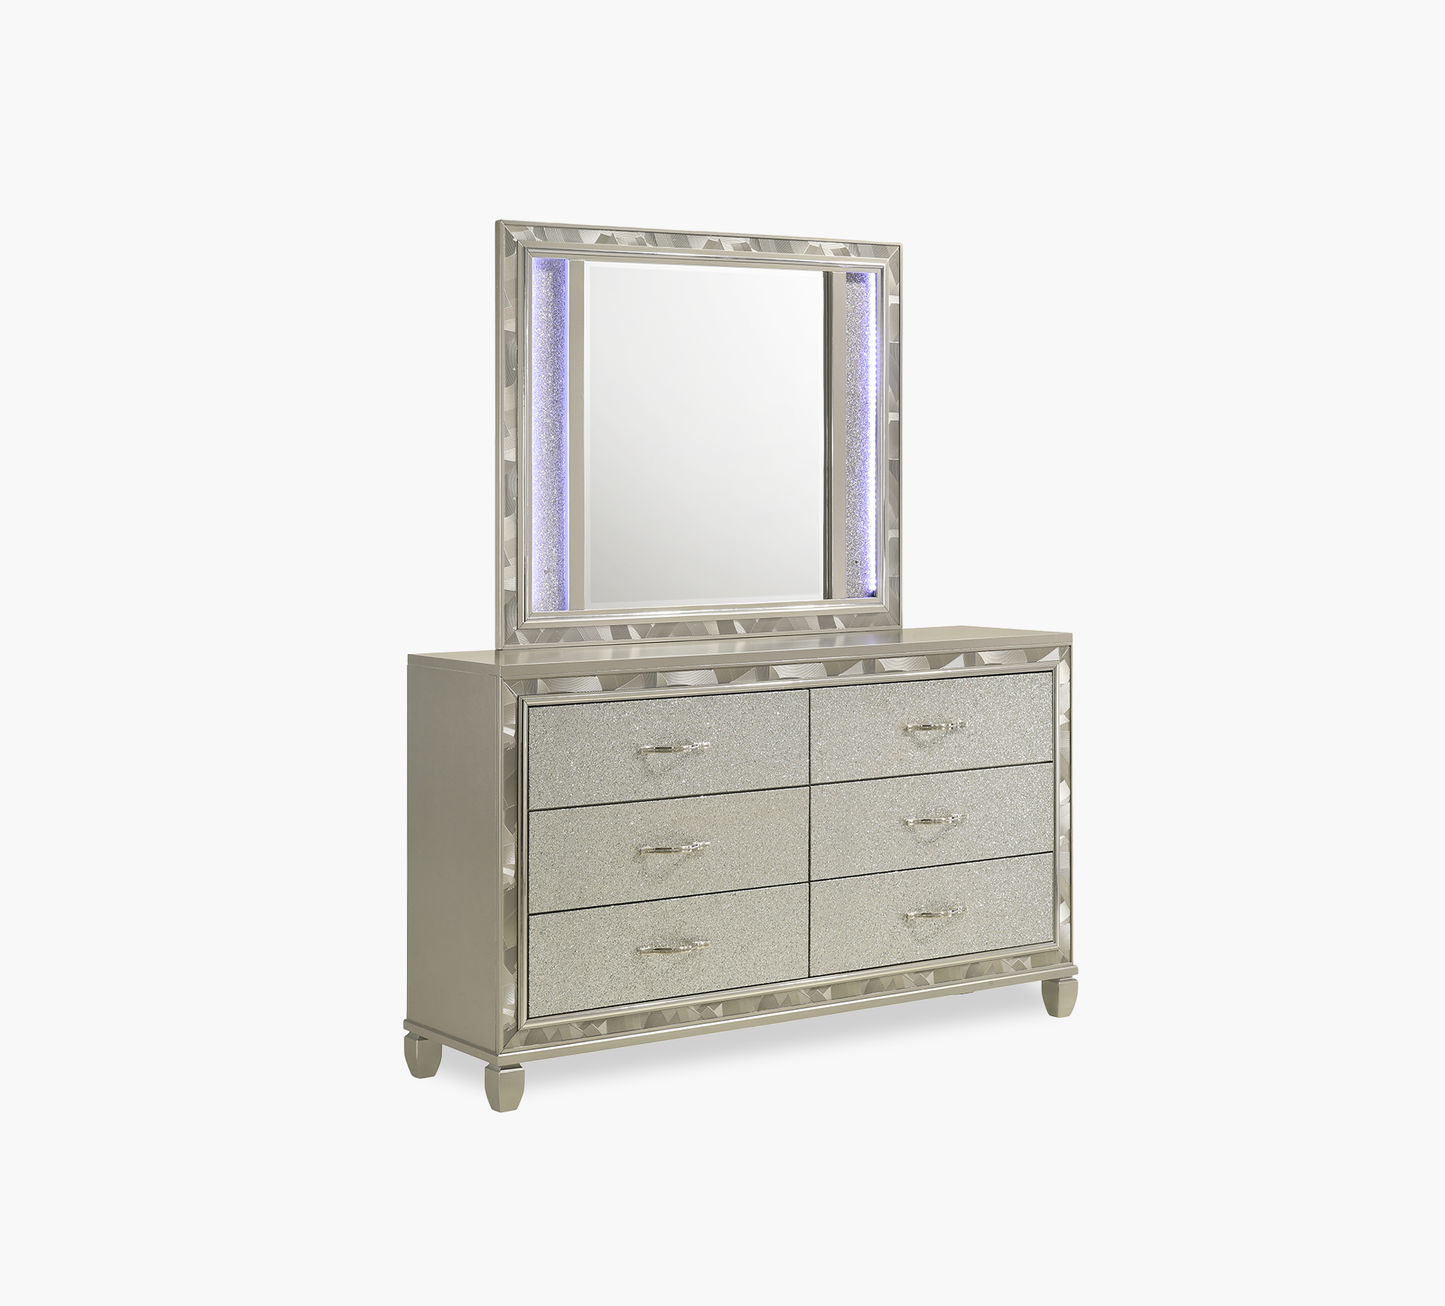 Radiance Square Lighted Mirror